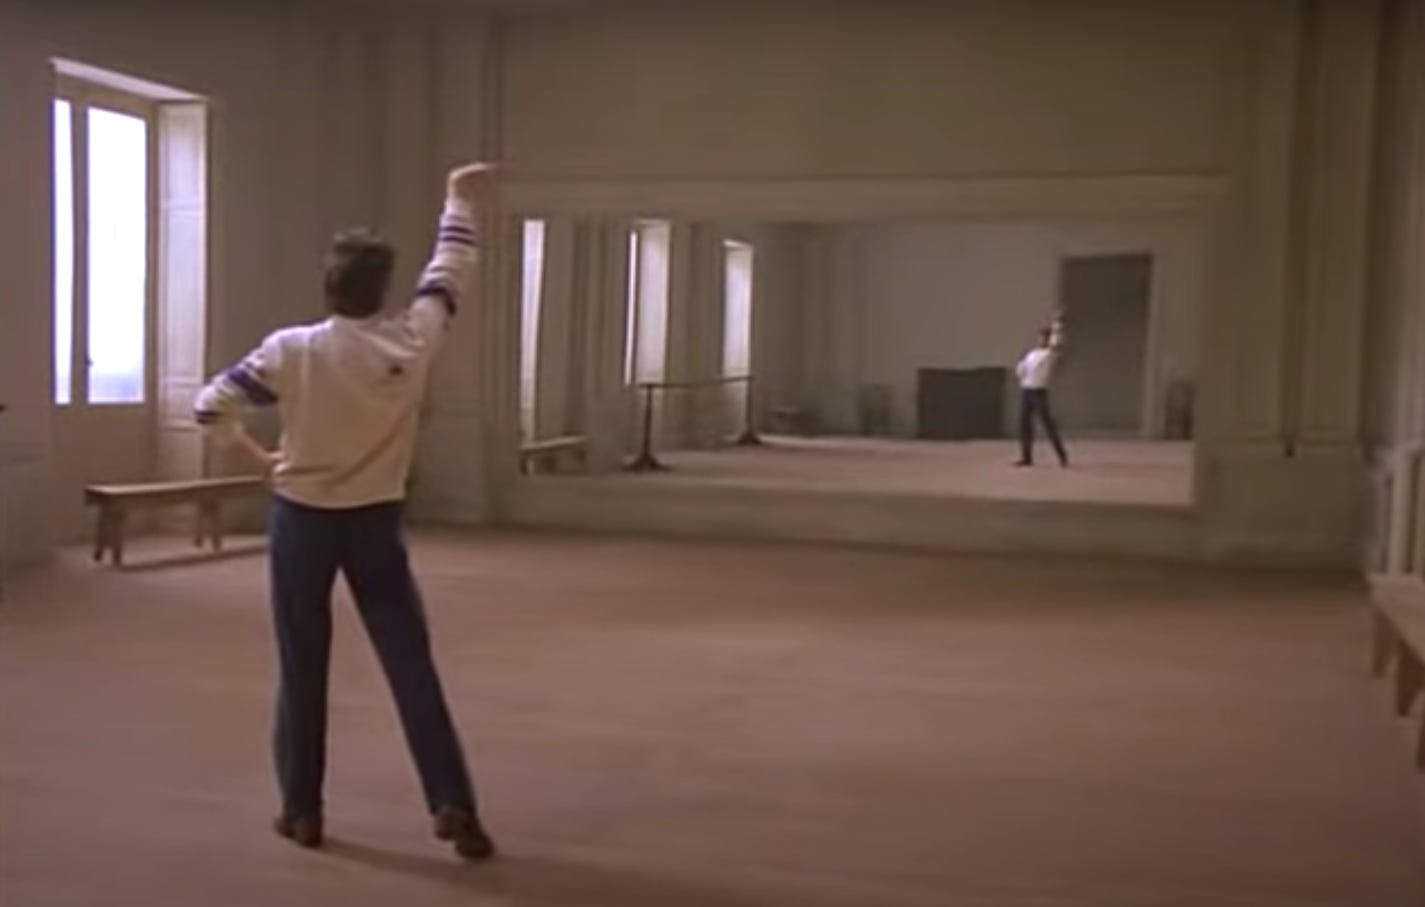 In a freeze-frame from the Carlos Saura film Bodas de Sangre, dancer Antonio Gades is in a striking, macho pose in an empty dance studio as he warms up before a dress rehearsal.